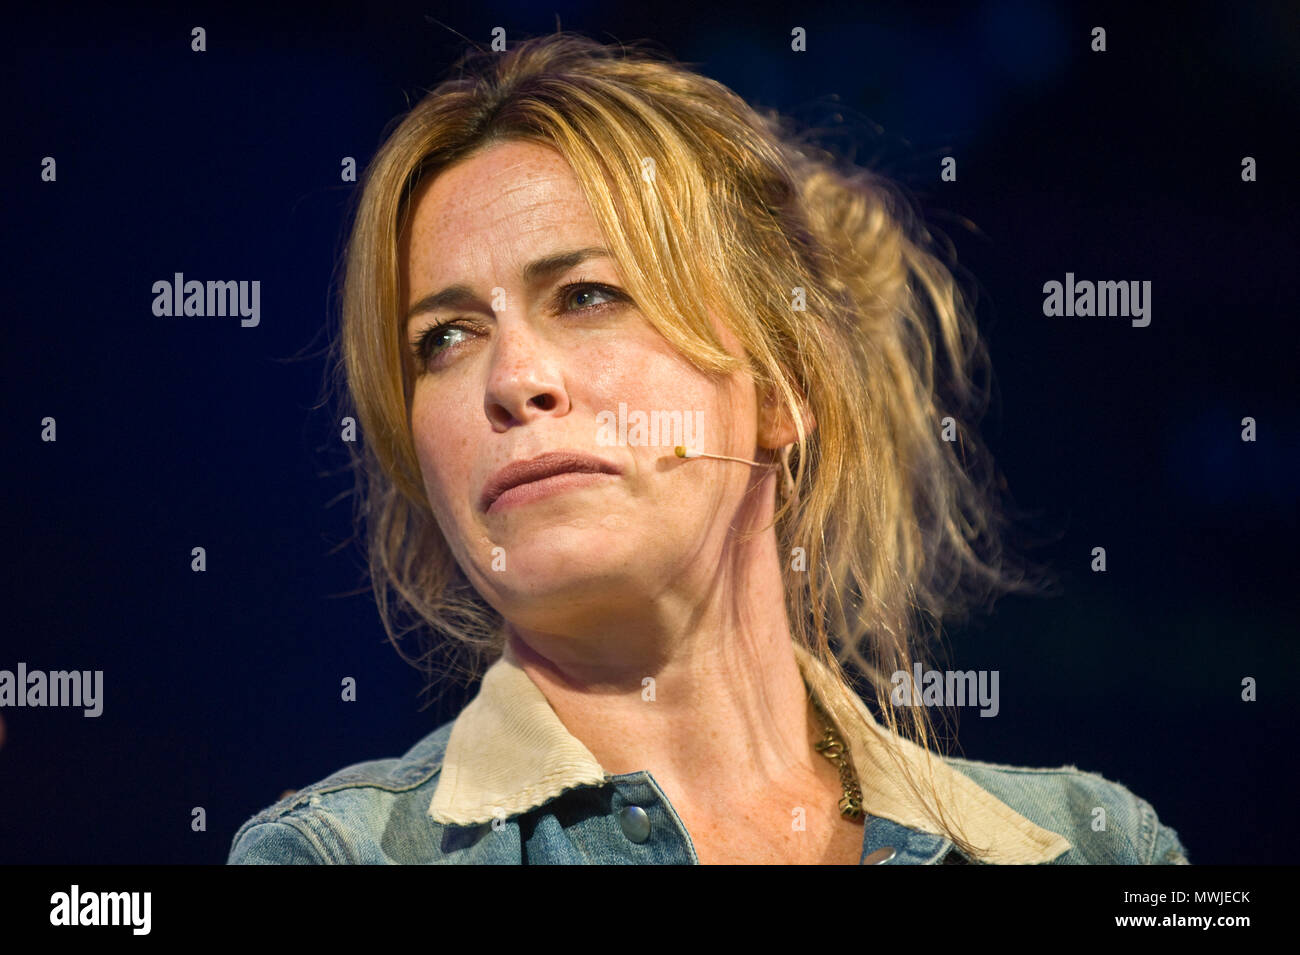 Eve Myles Welsh actress speaking on stage at Hay Festival 2018 Hay-on-Wye Powys Wales UK Stock Photo